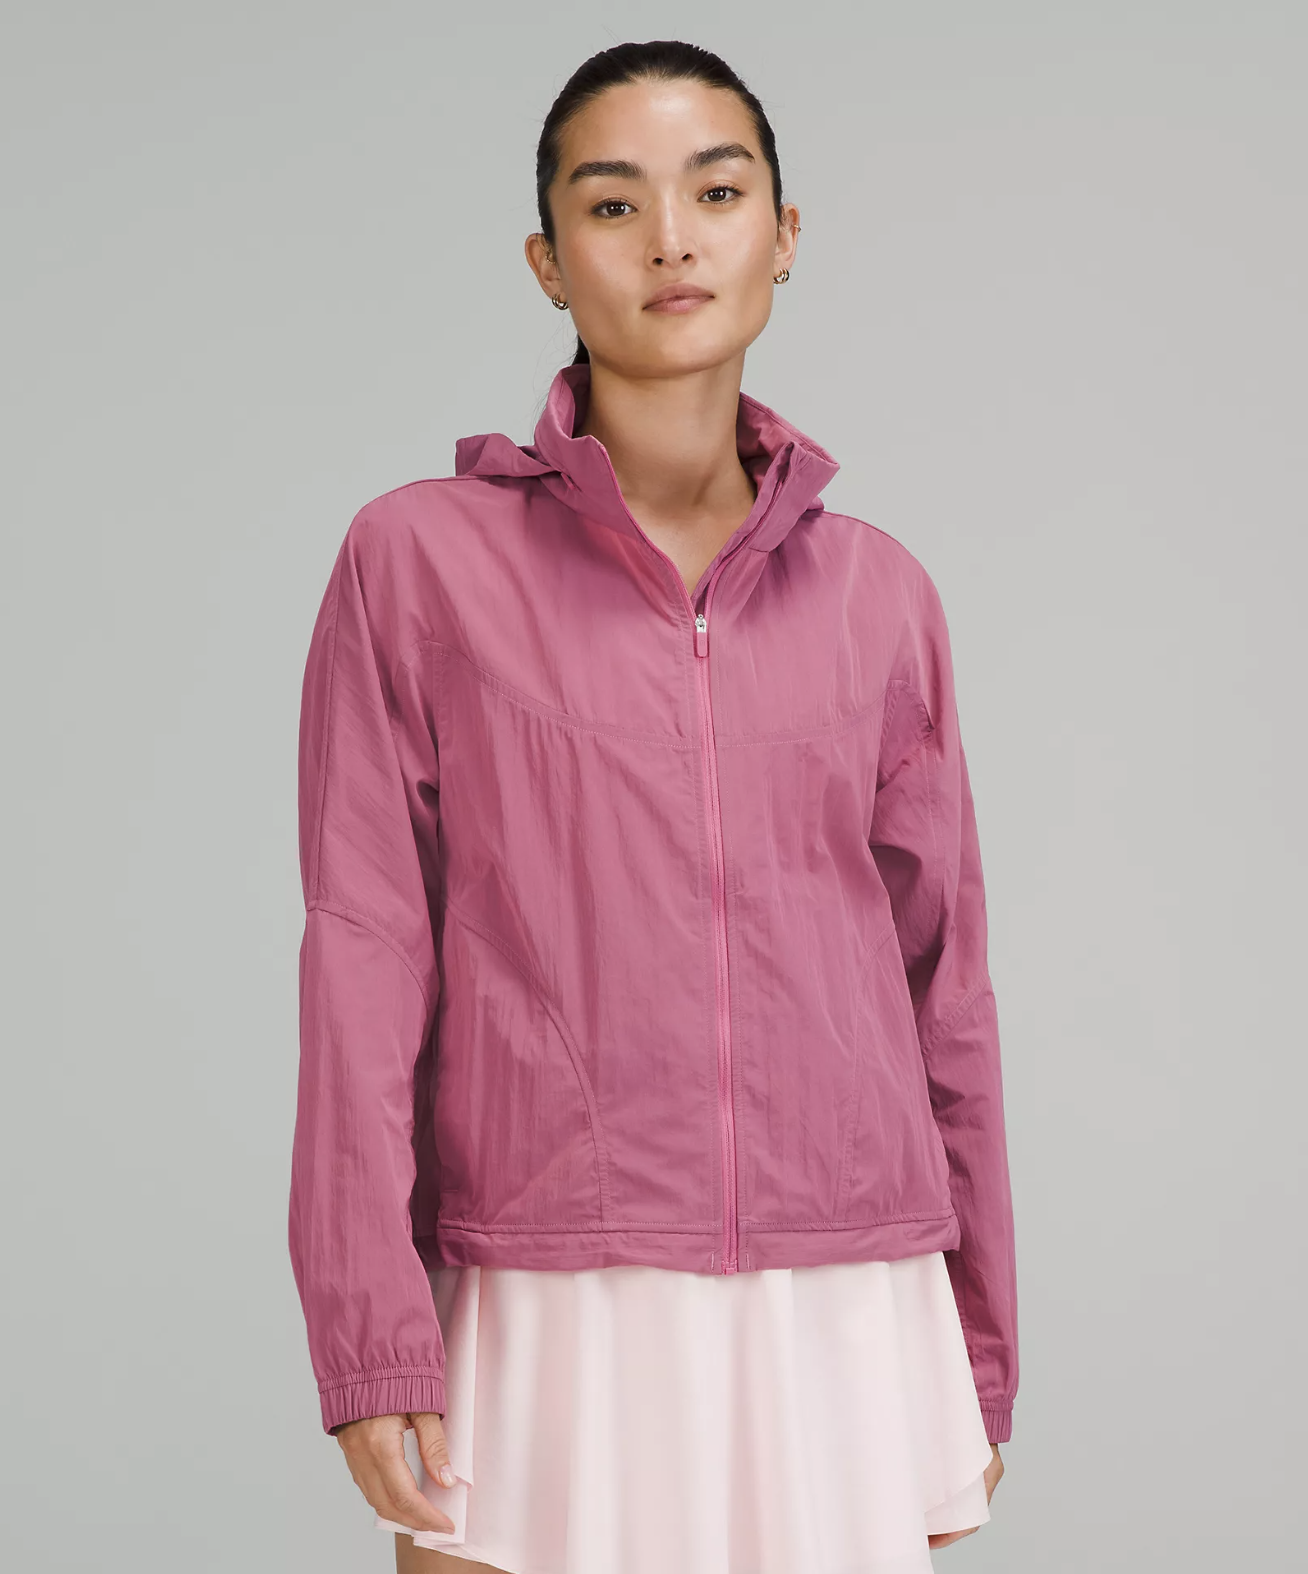 a person wearing the cute lightweight jacket with a tennis skirt